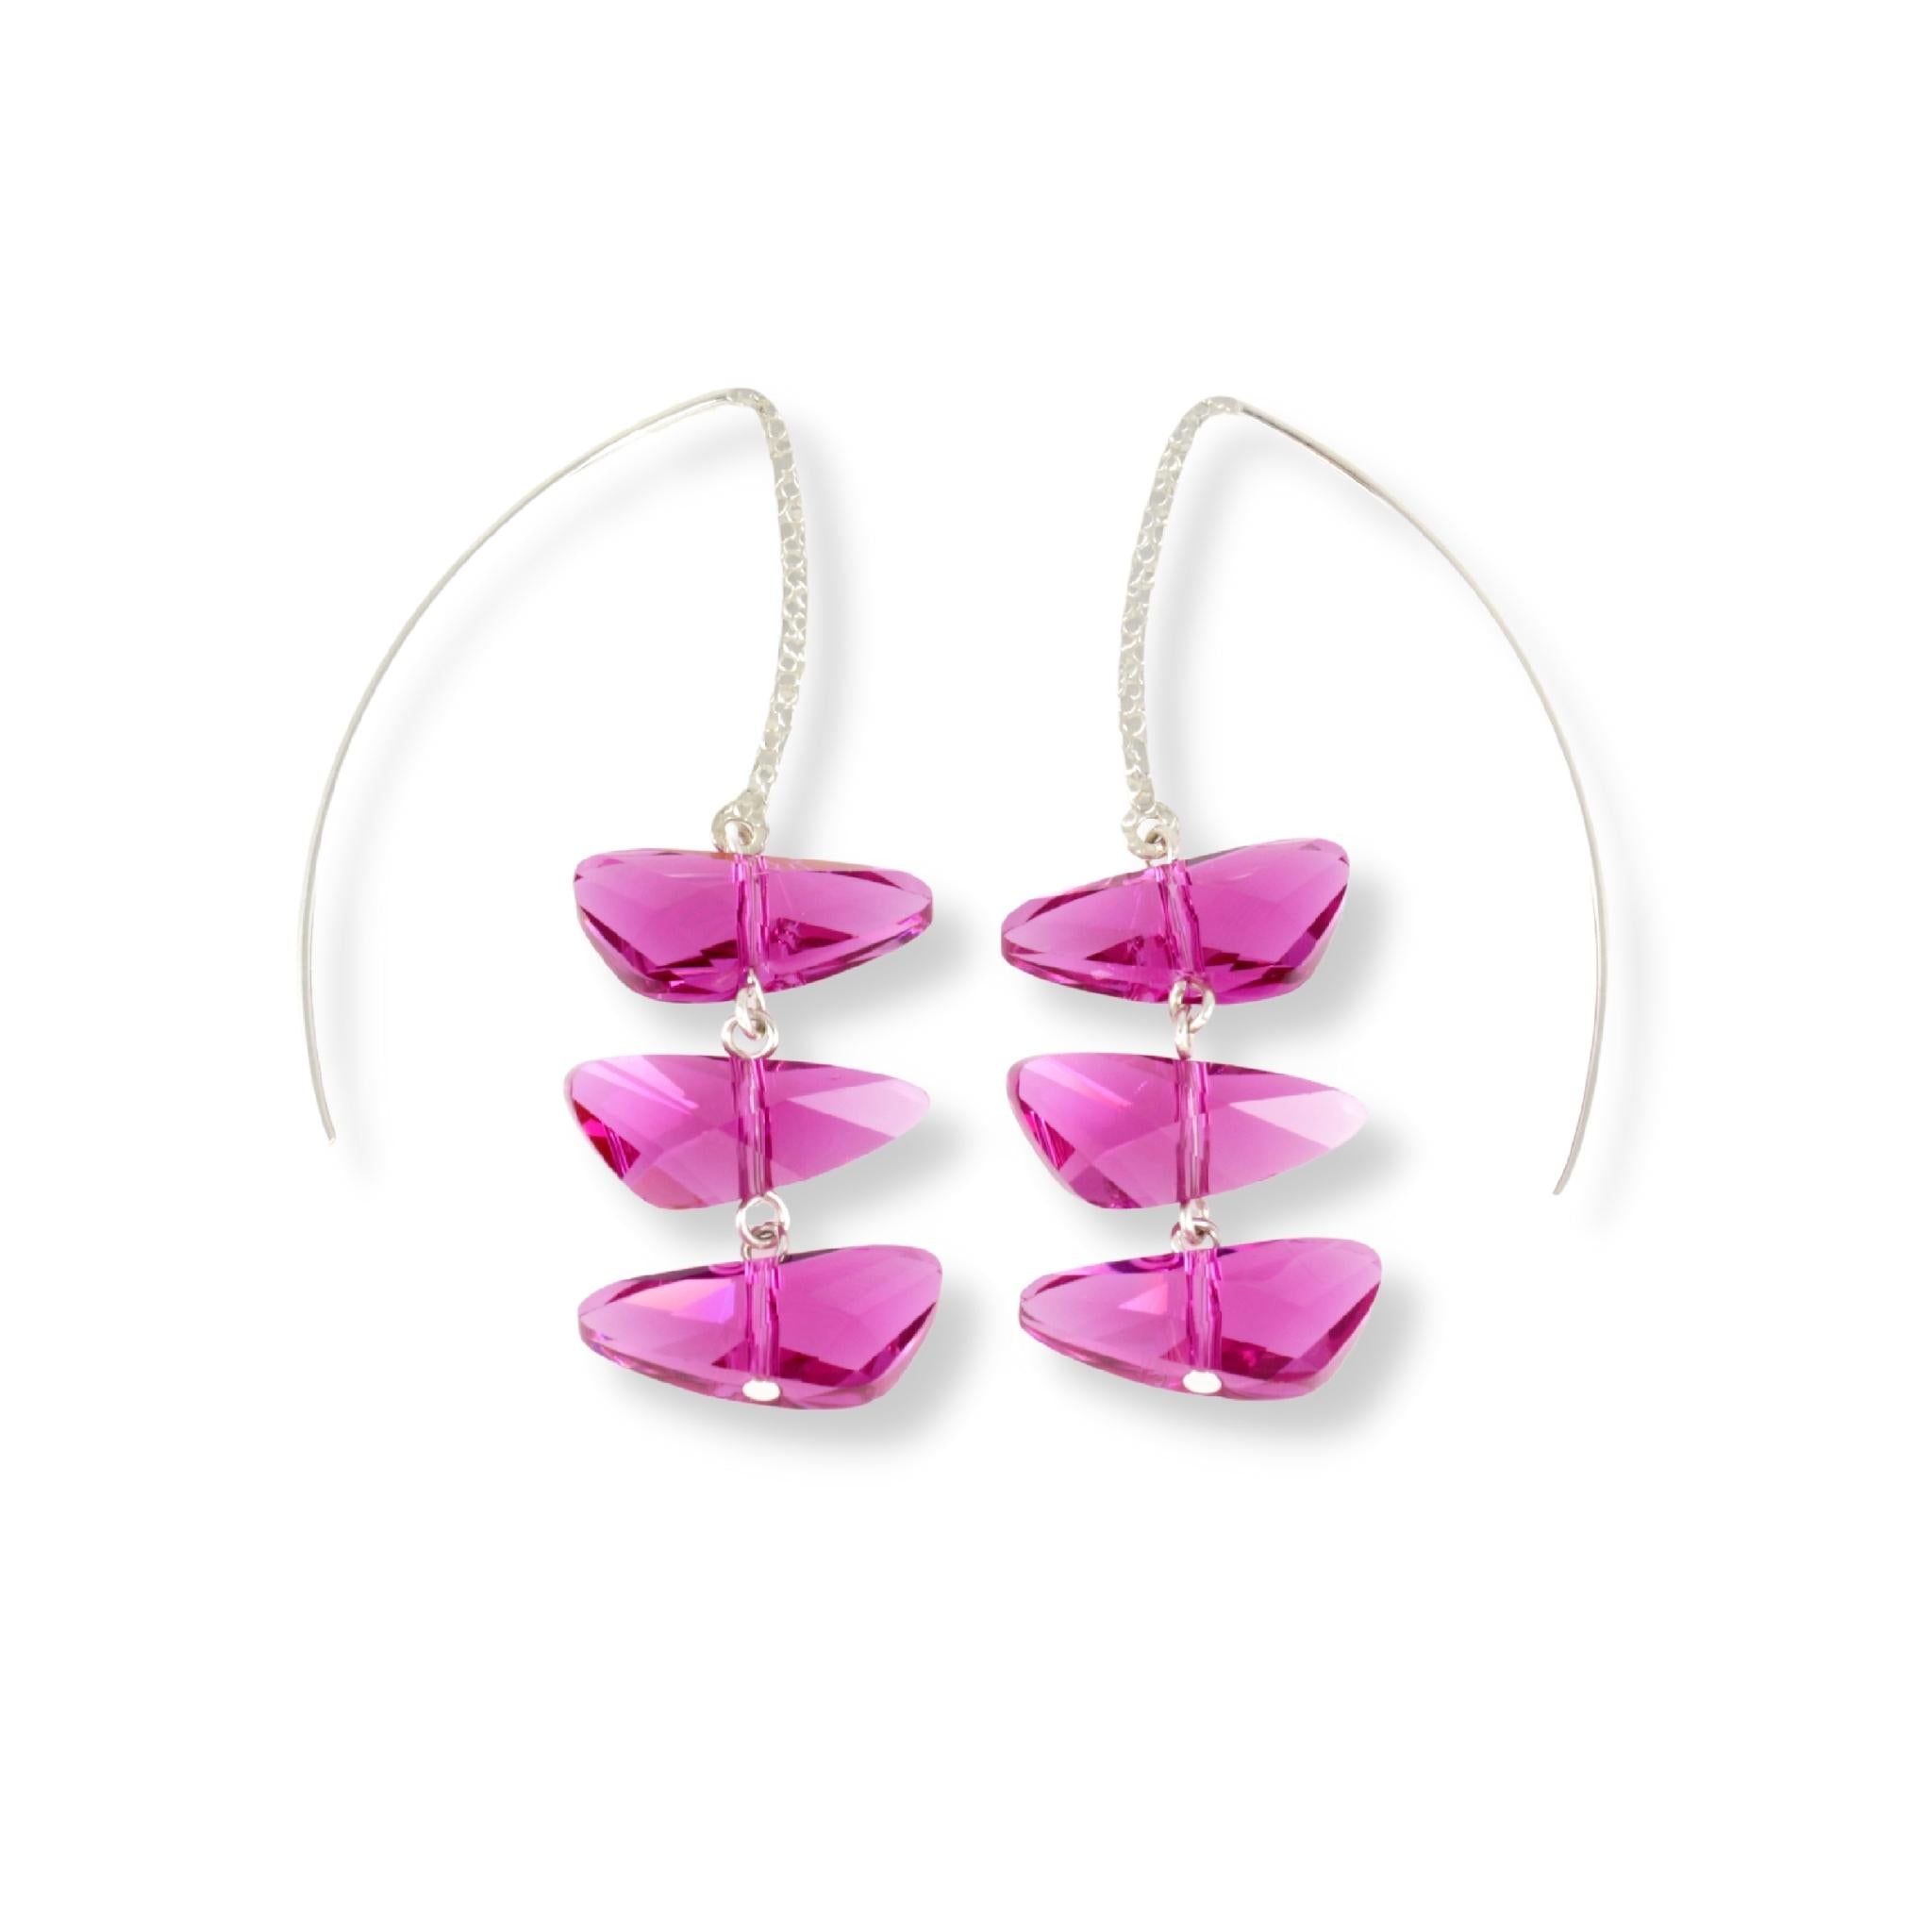 Sterling silver long marquise hook style earrings featuring three wing shaped Swarovski crystals in a reflective, light fuchsia color.